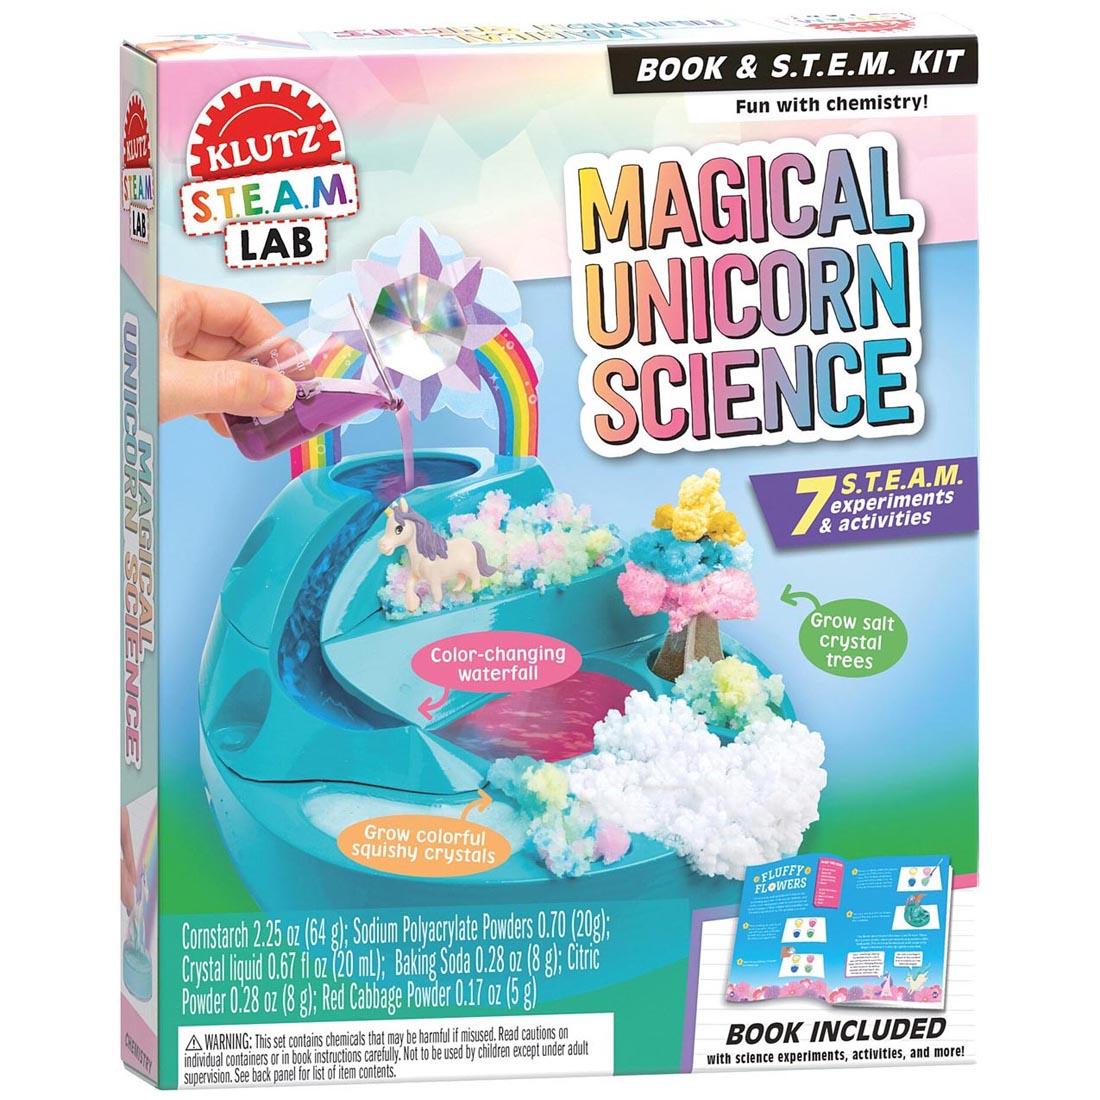 Magical Unicorn Science By Klutz Press